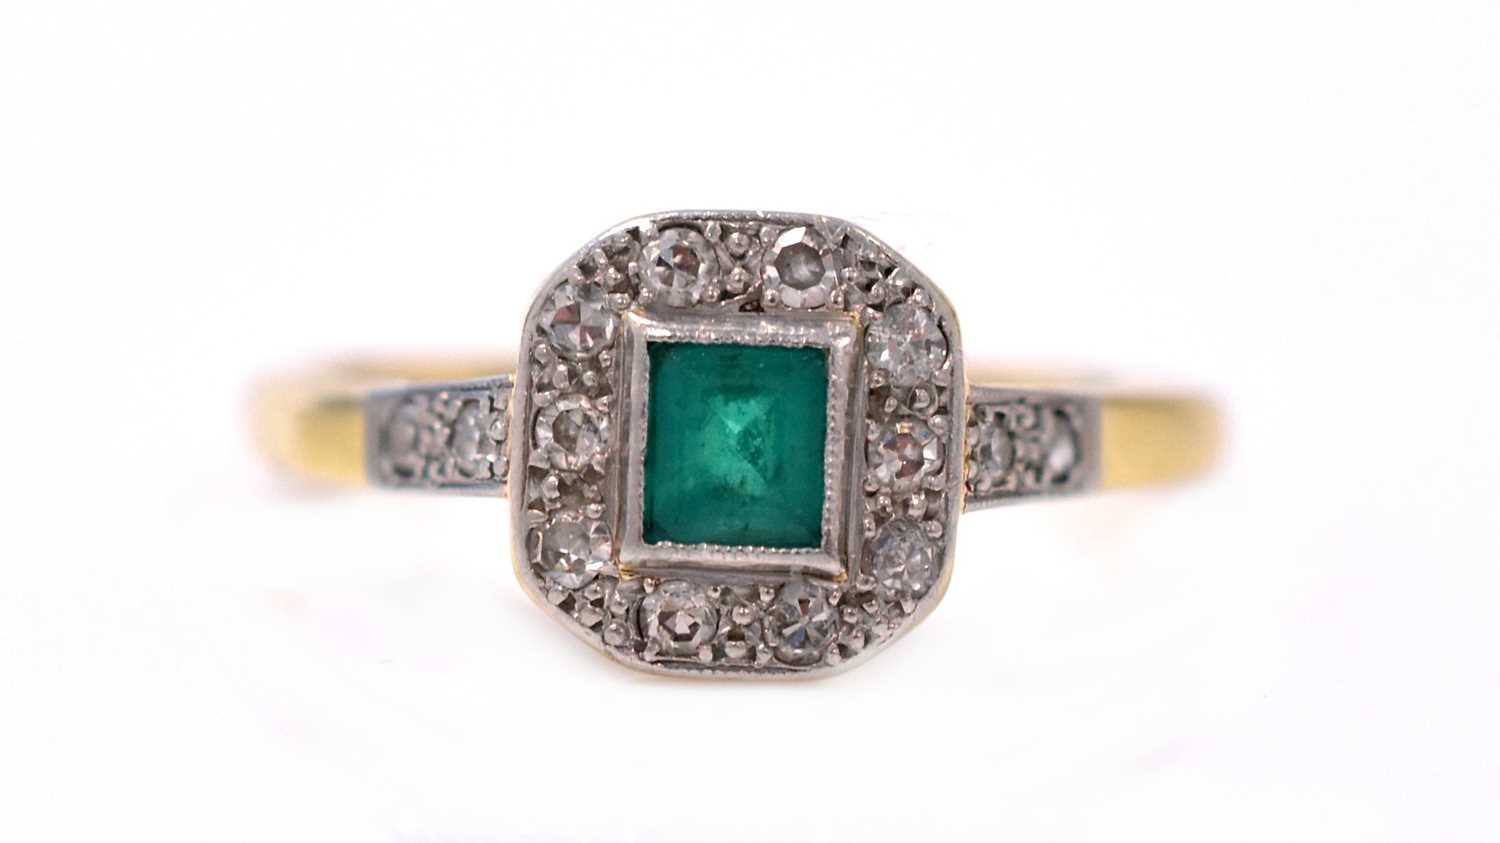 Lot 491 - An emerald and diamond cluster ring